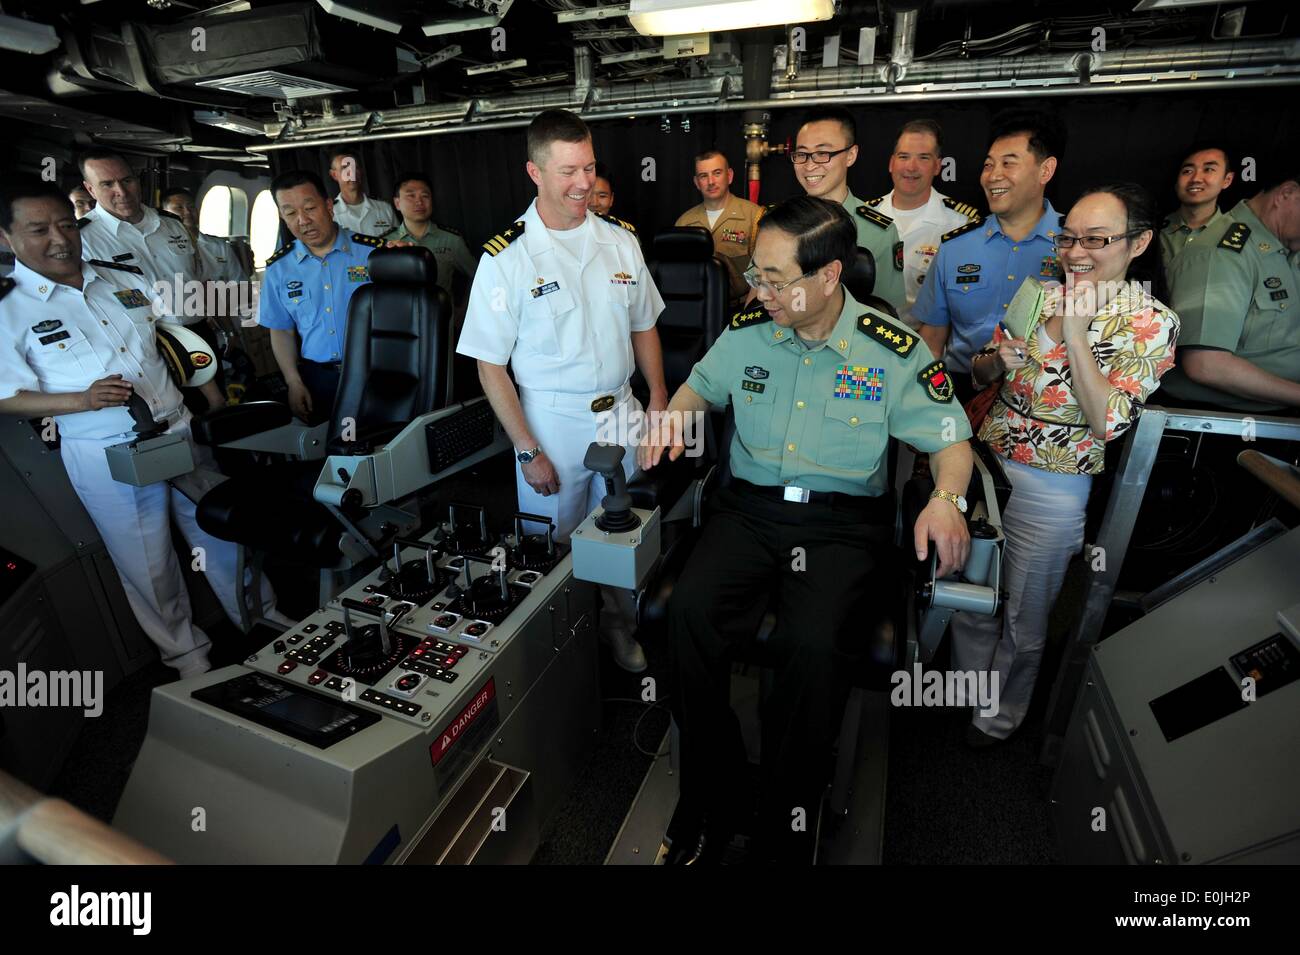 Chief of the General Staff Peoples Republic of China Gen. Fang Fenghui is shown the high tech navigation console of the littoral combat ship USS Coronado by US Navy Cmdr. Shawn Johnston during a tour May 13, 2014 in San Diego, California. Stock Photo